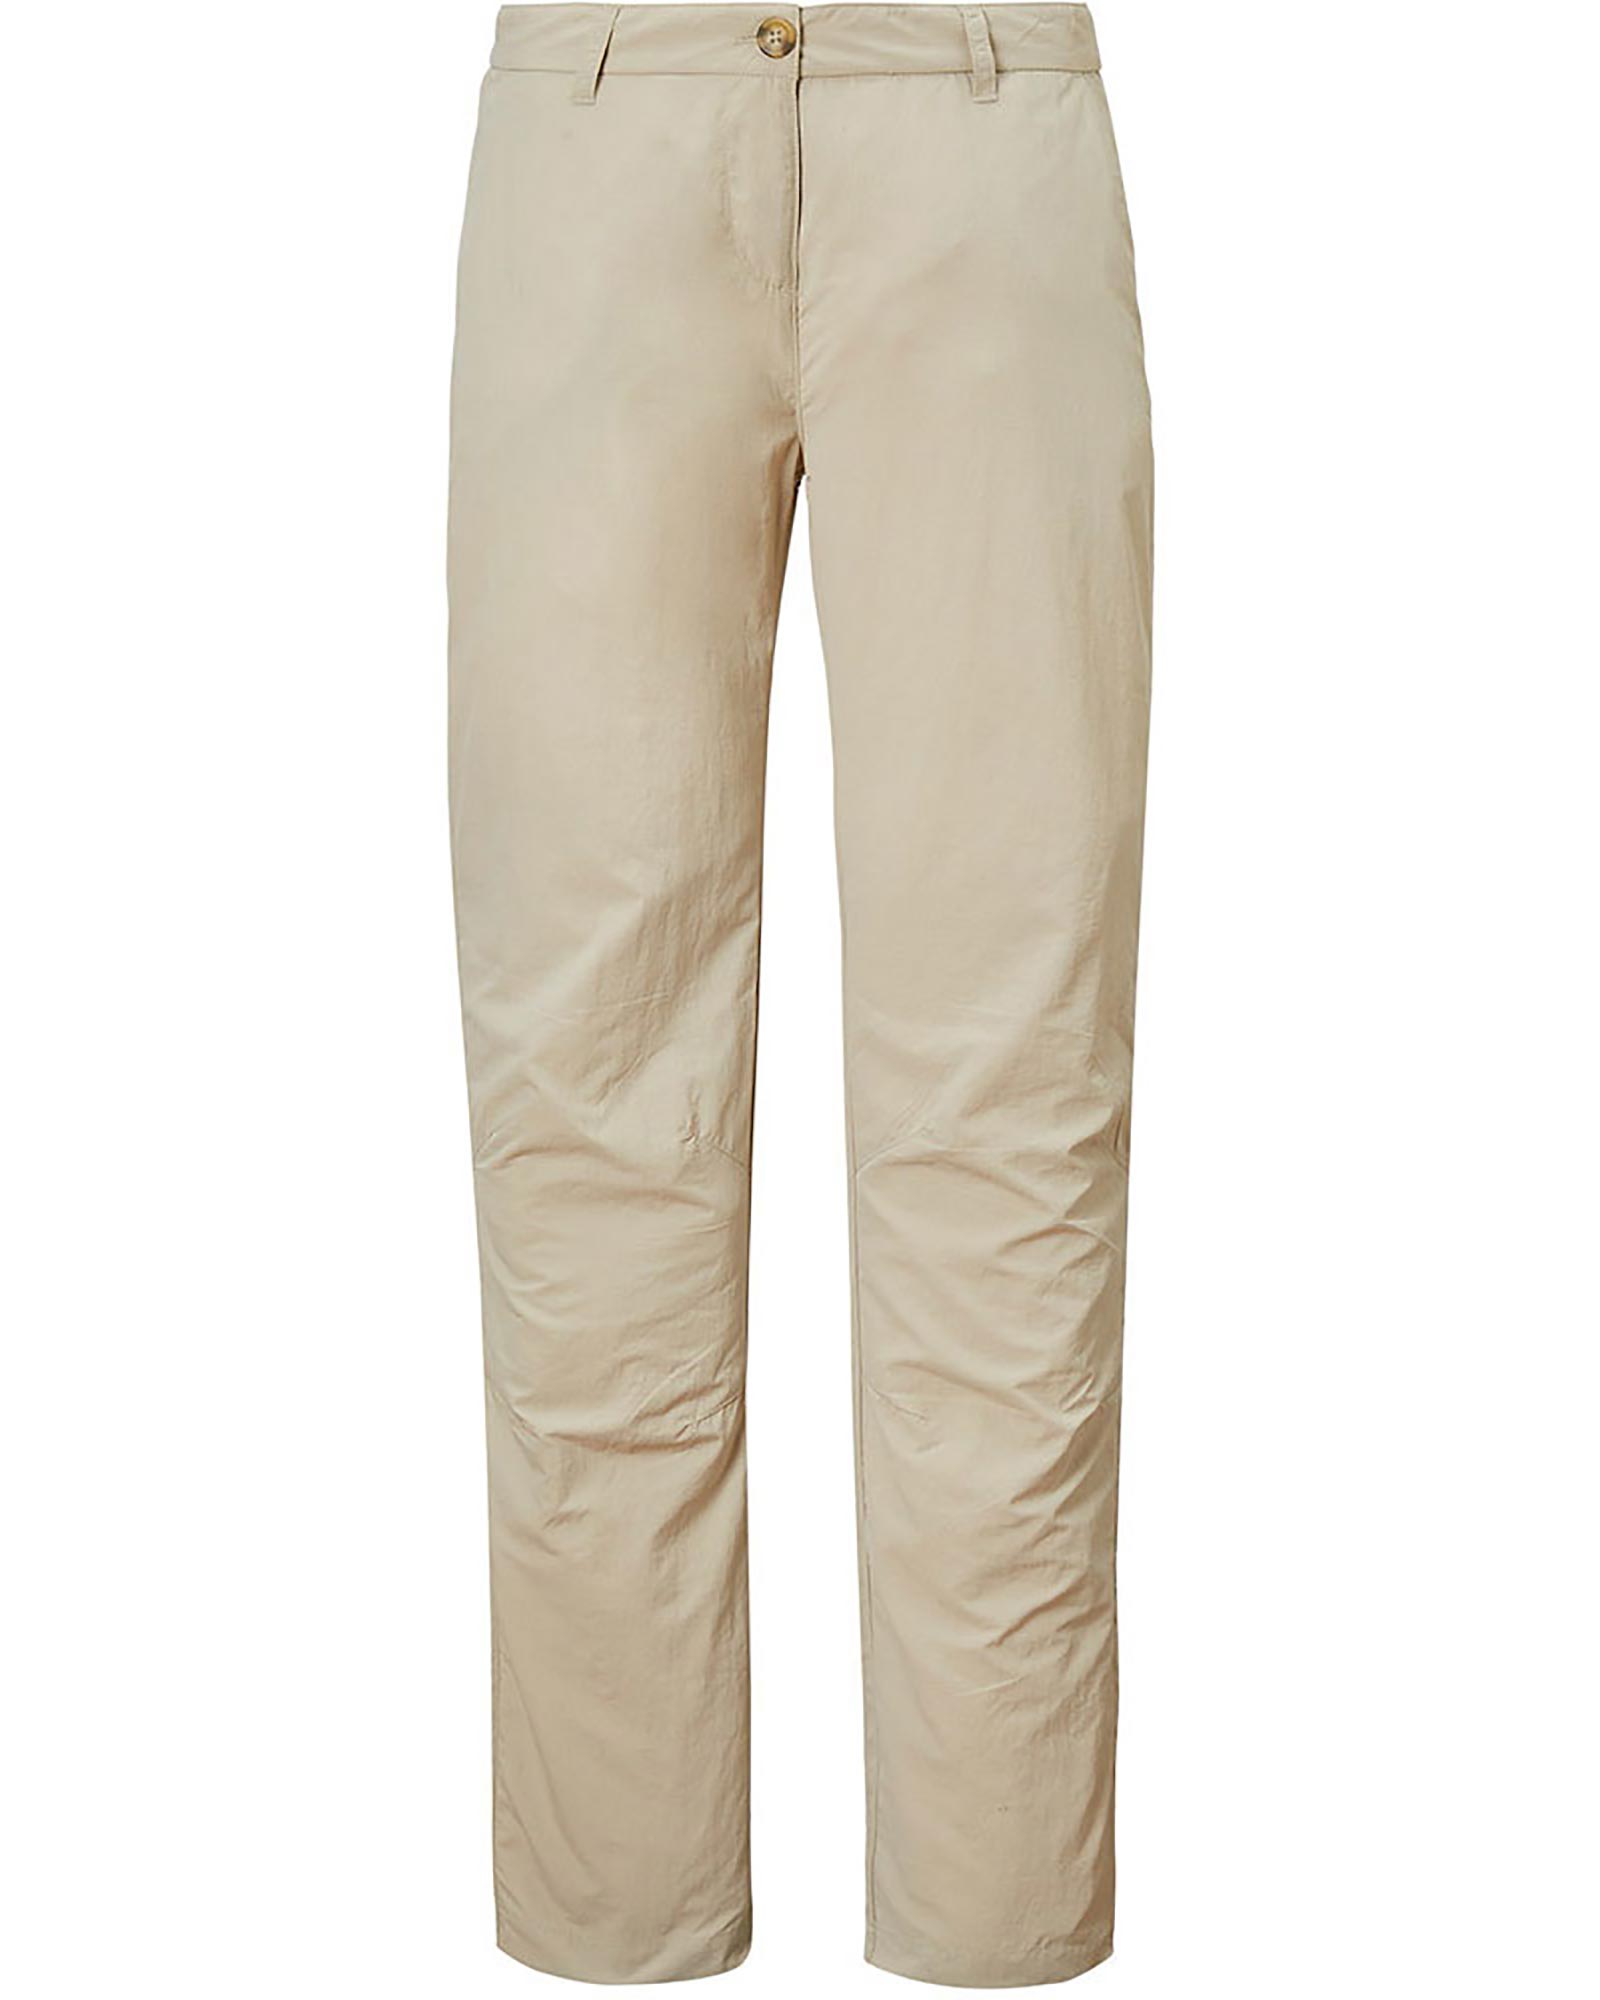 Craghoppers Nosilife 2 Womens Trousers